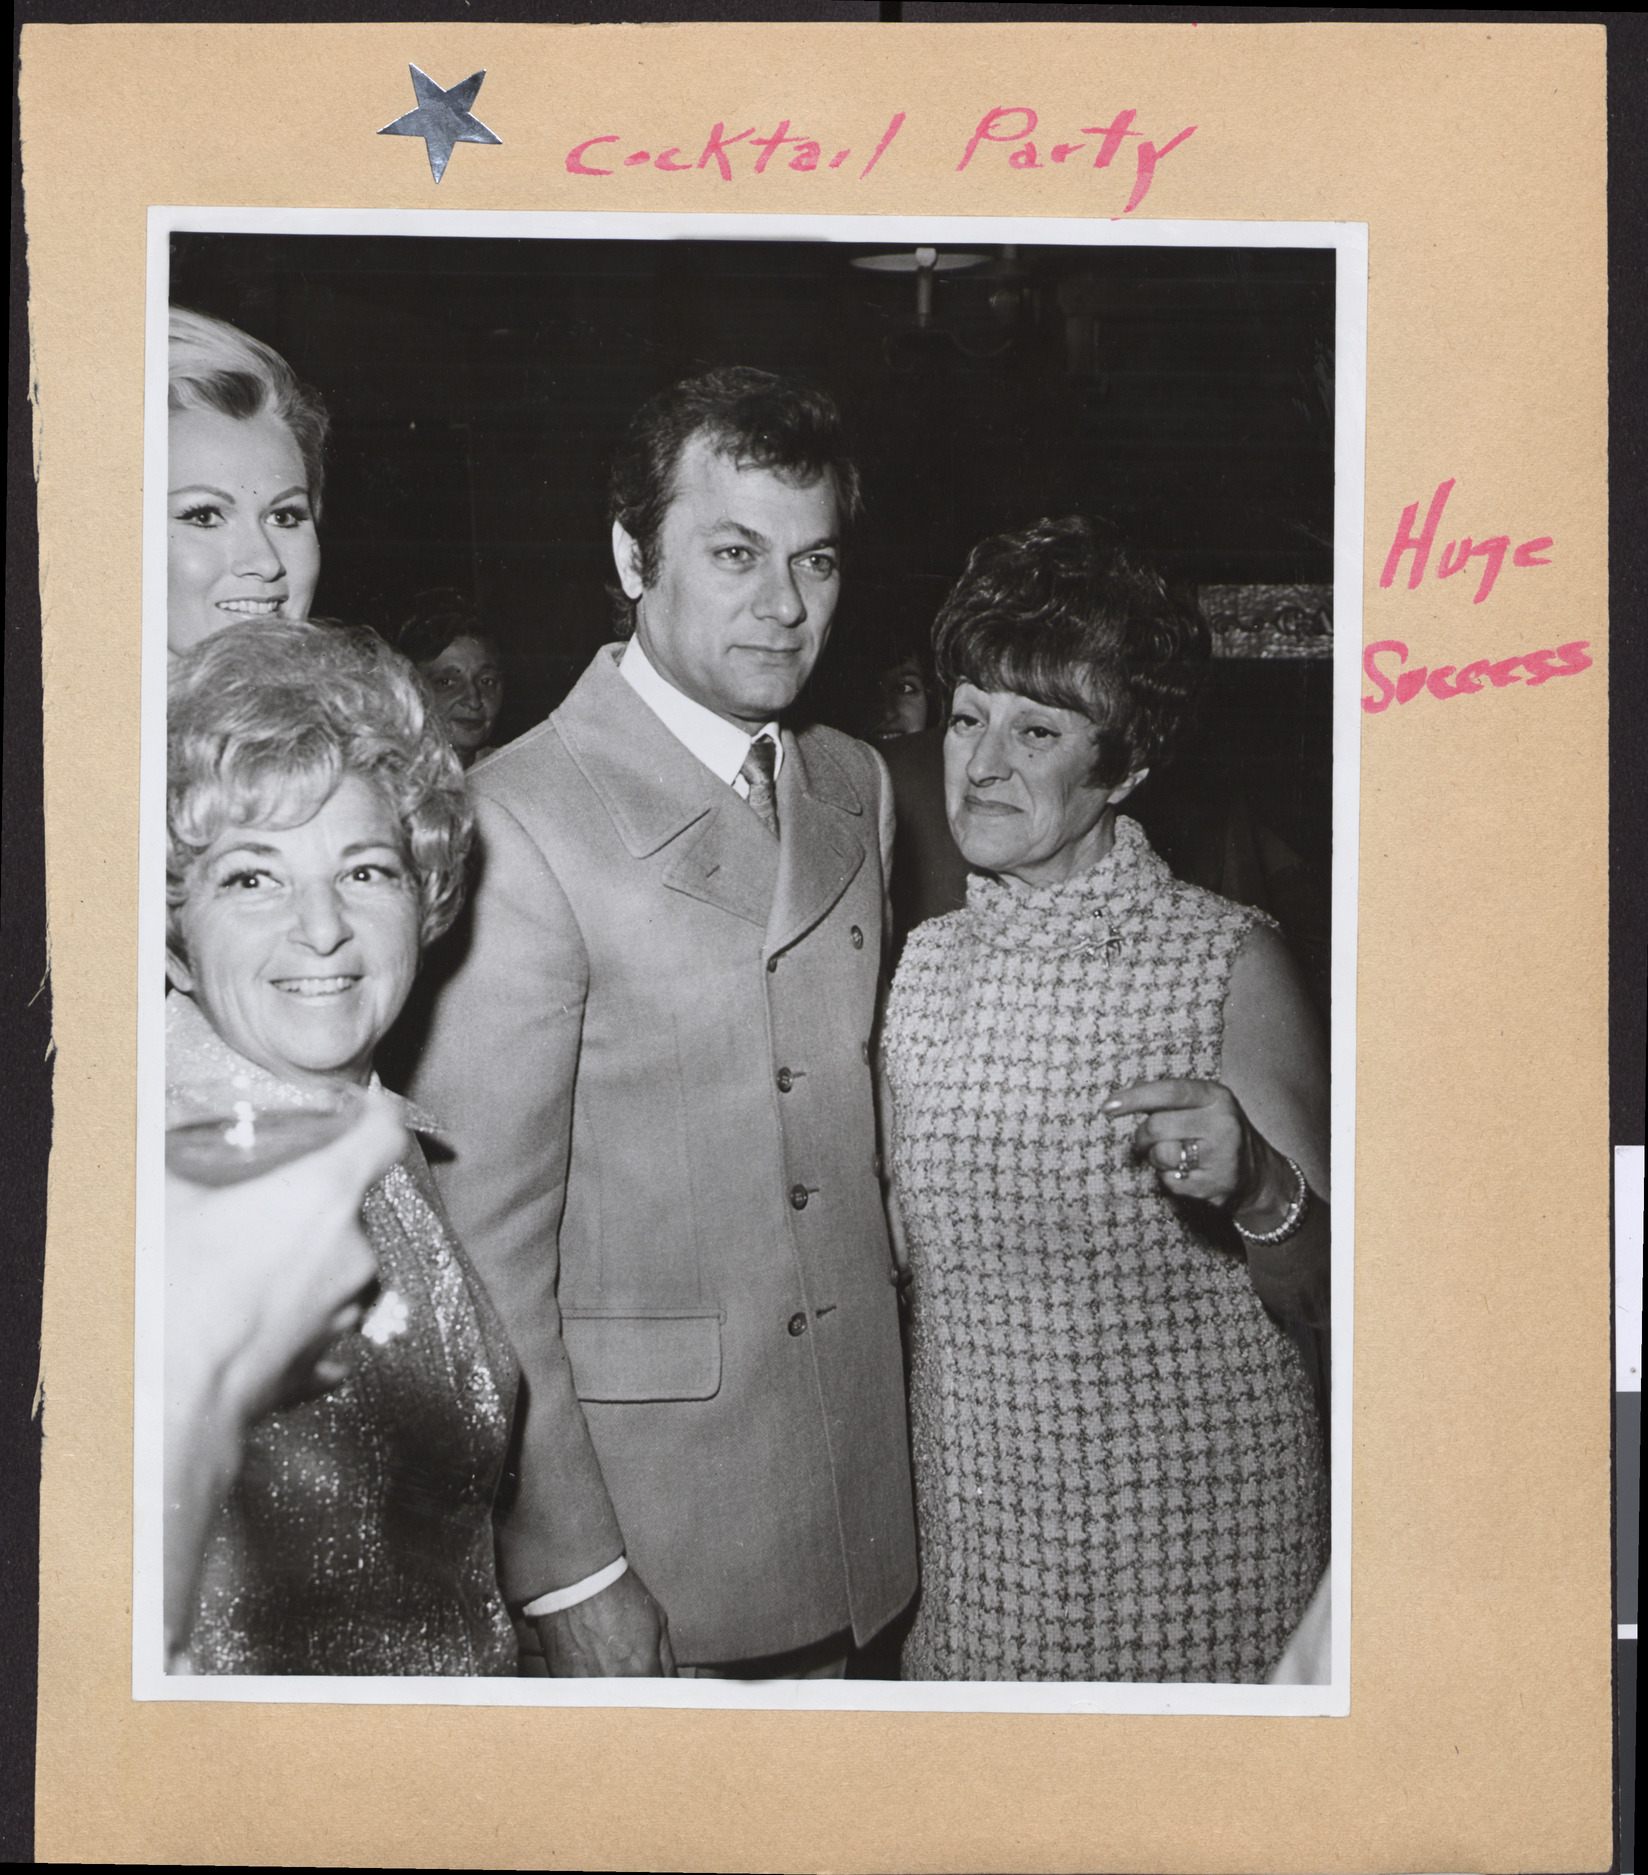 Cocktail Party, Bonanza Hotel: Photograph of Tony Curtis with Lillian Miller